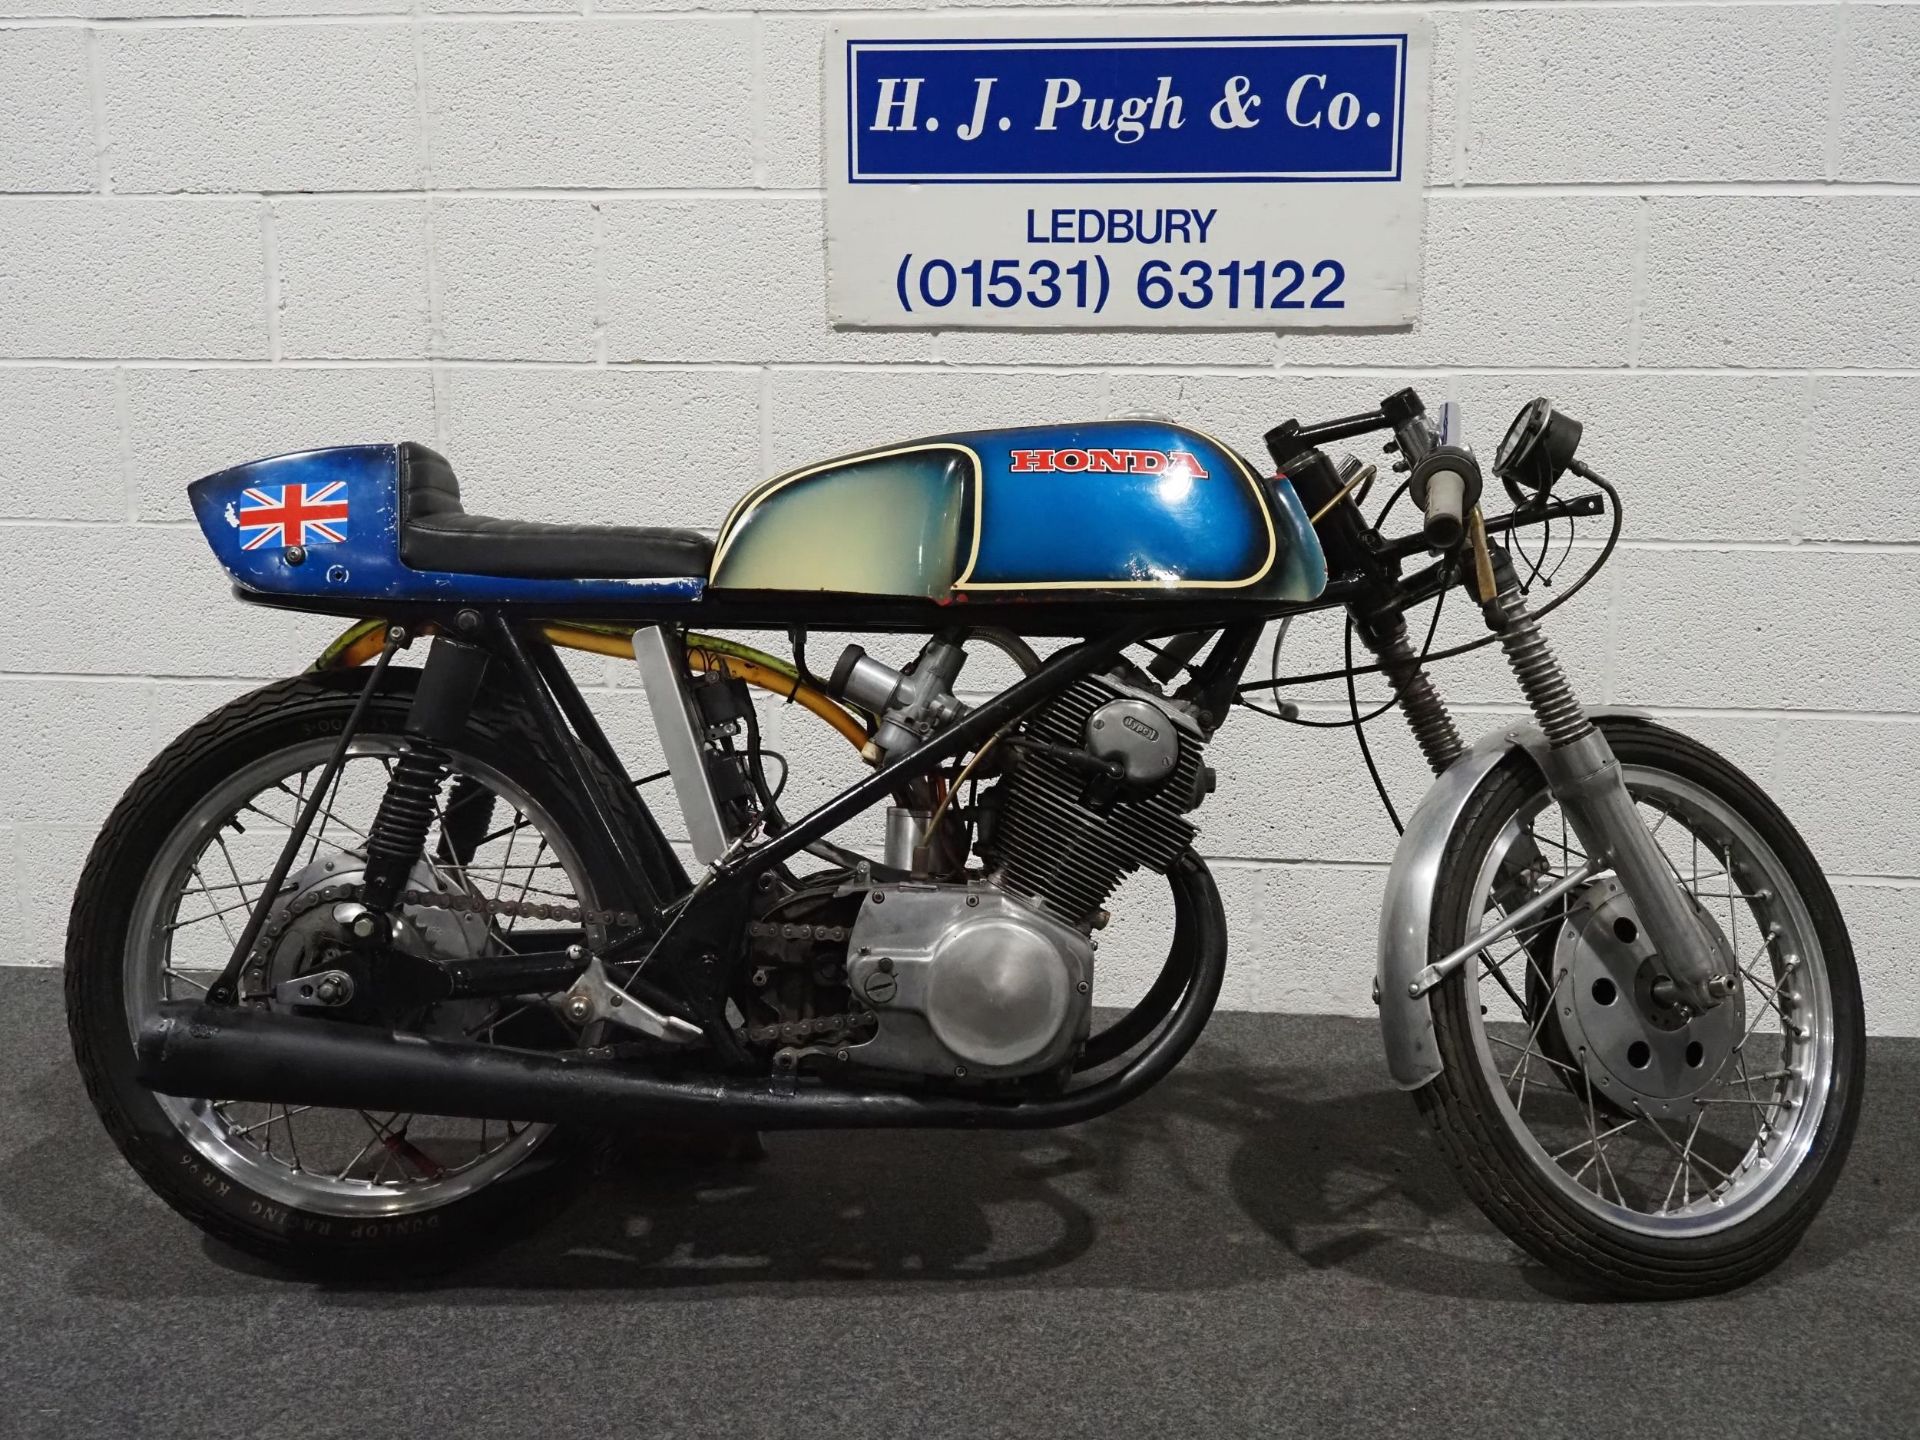 Honda CB72 race bike in Seely type frame with Norton forks and electronic ignition. Was being